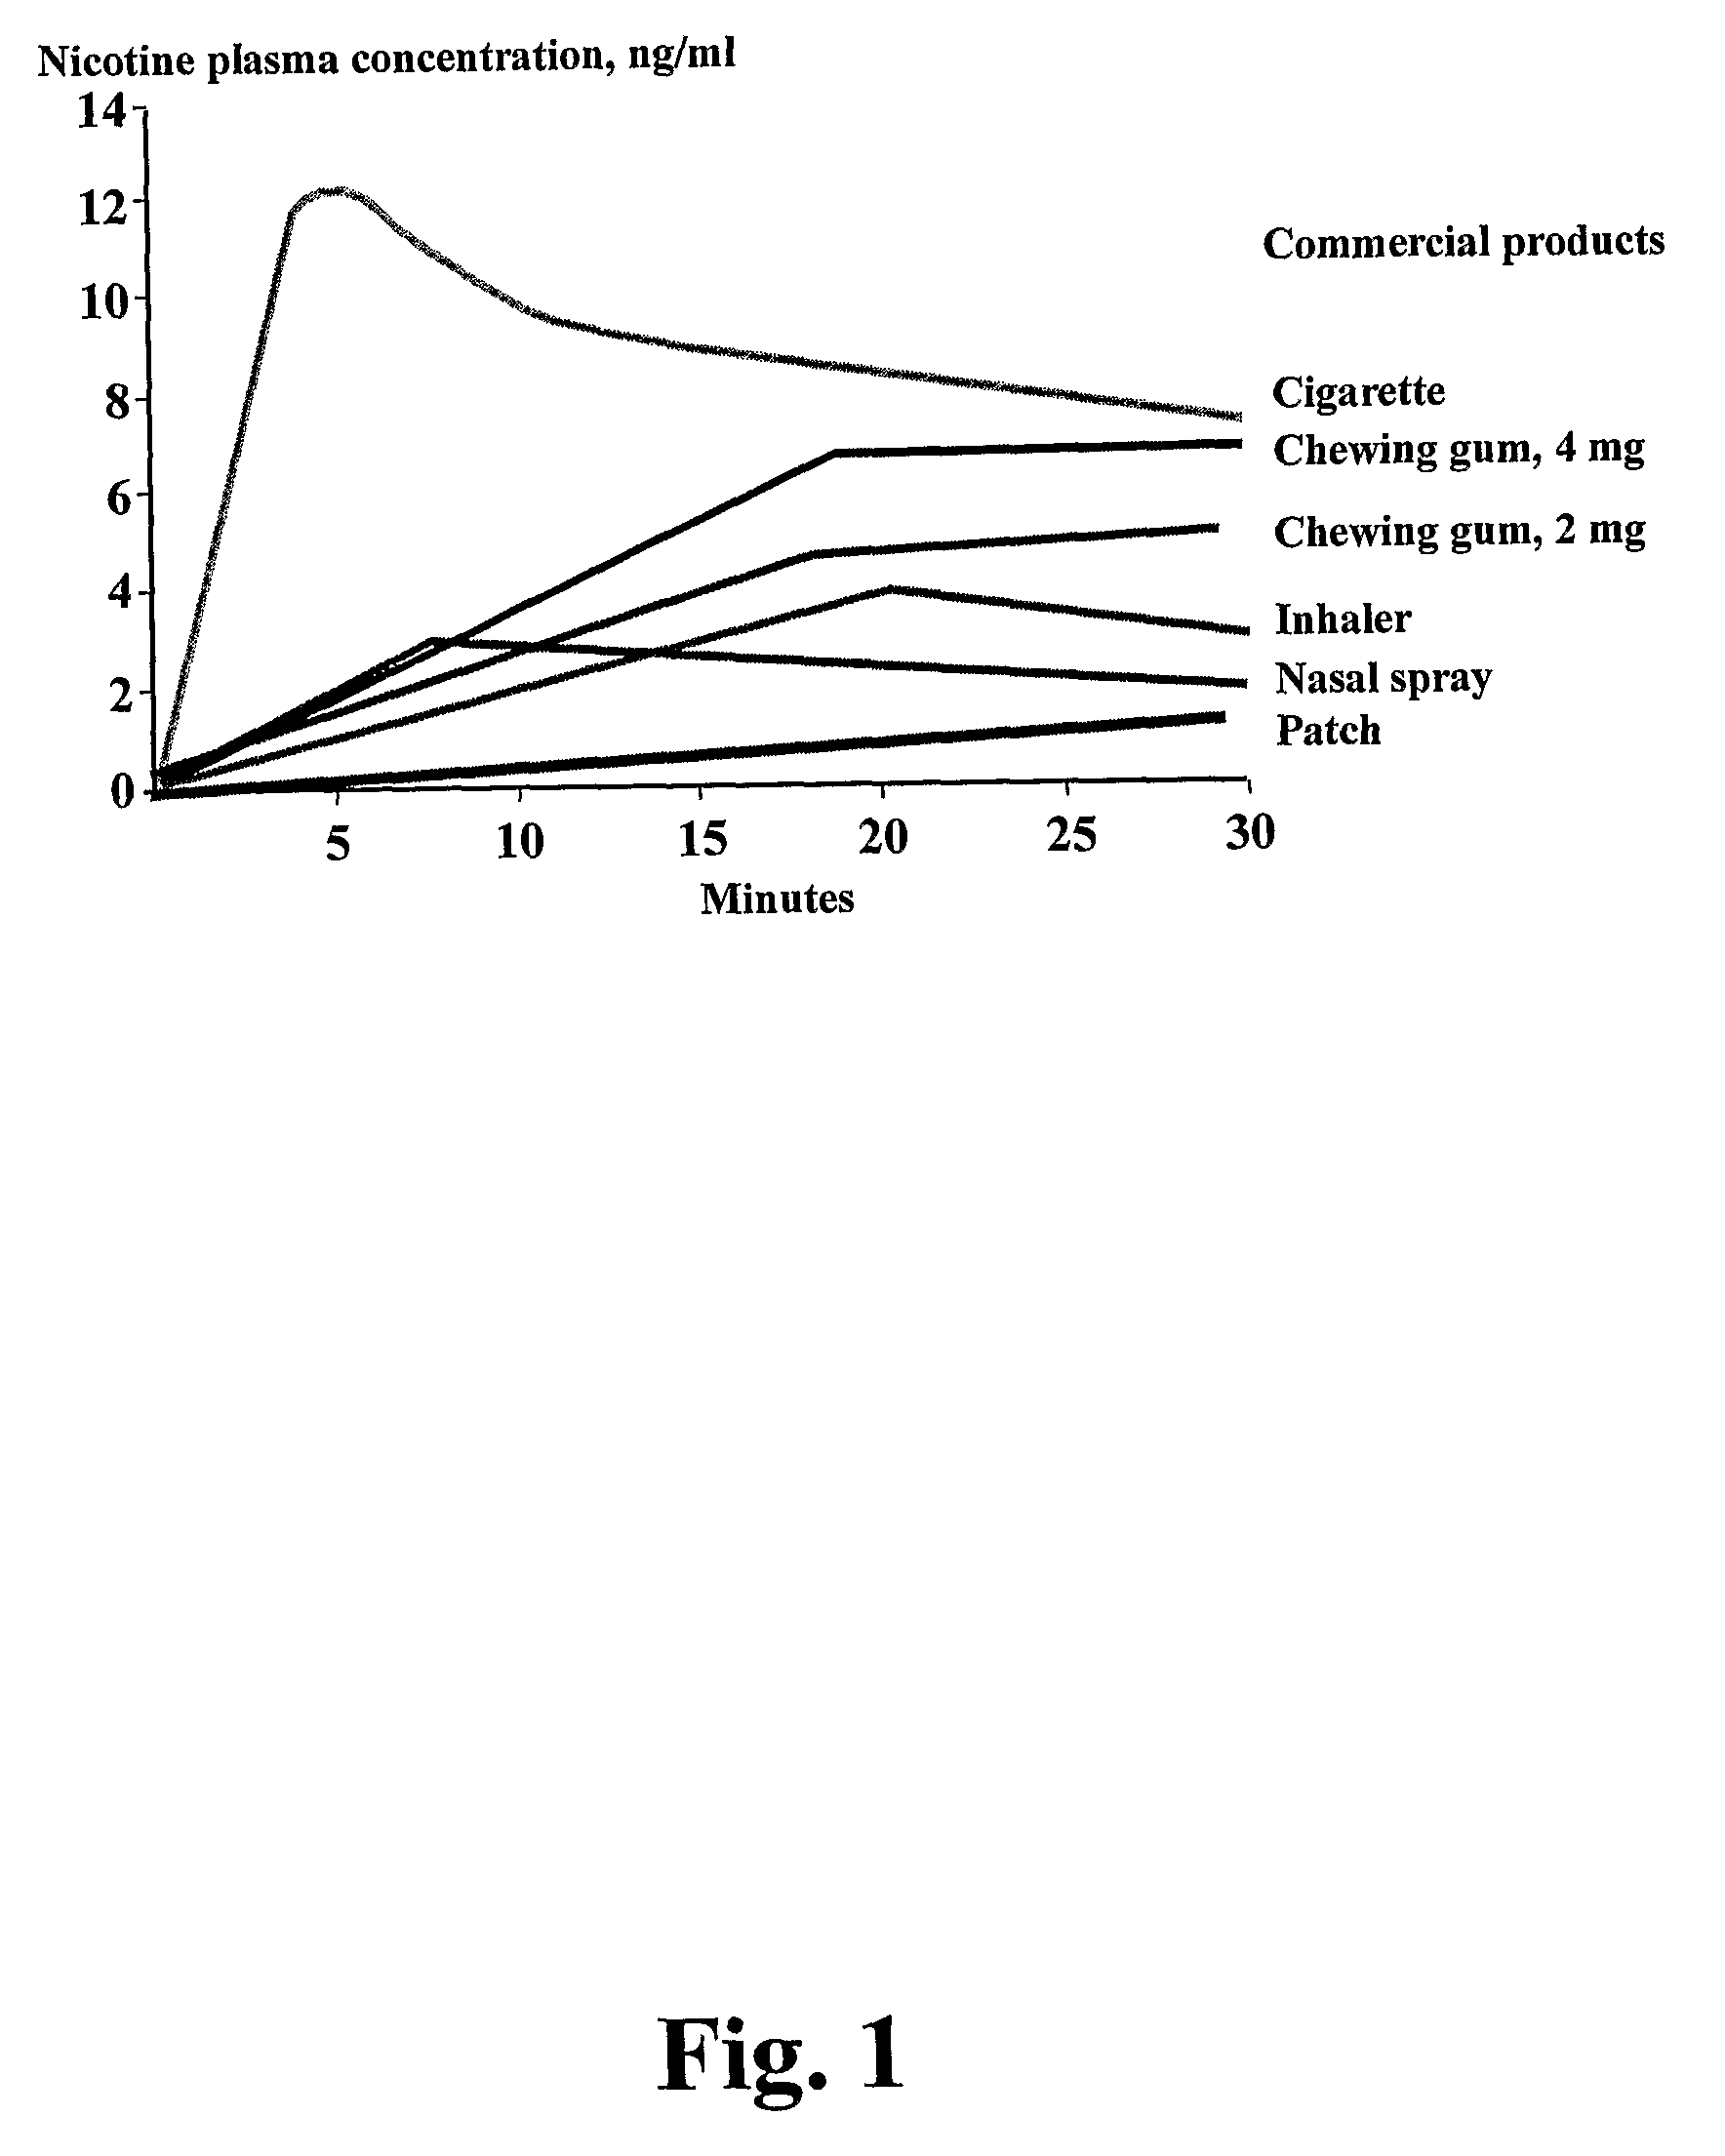 Use of an Artificial Sweetener to Enhance Absorption of Nicotine